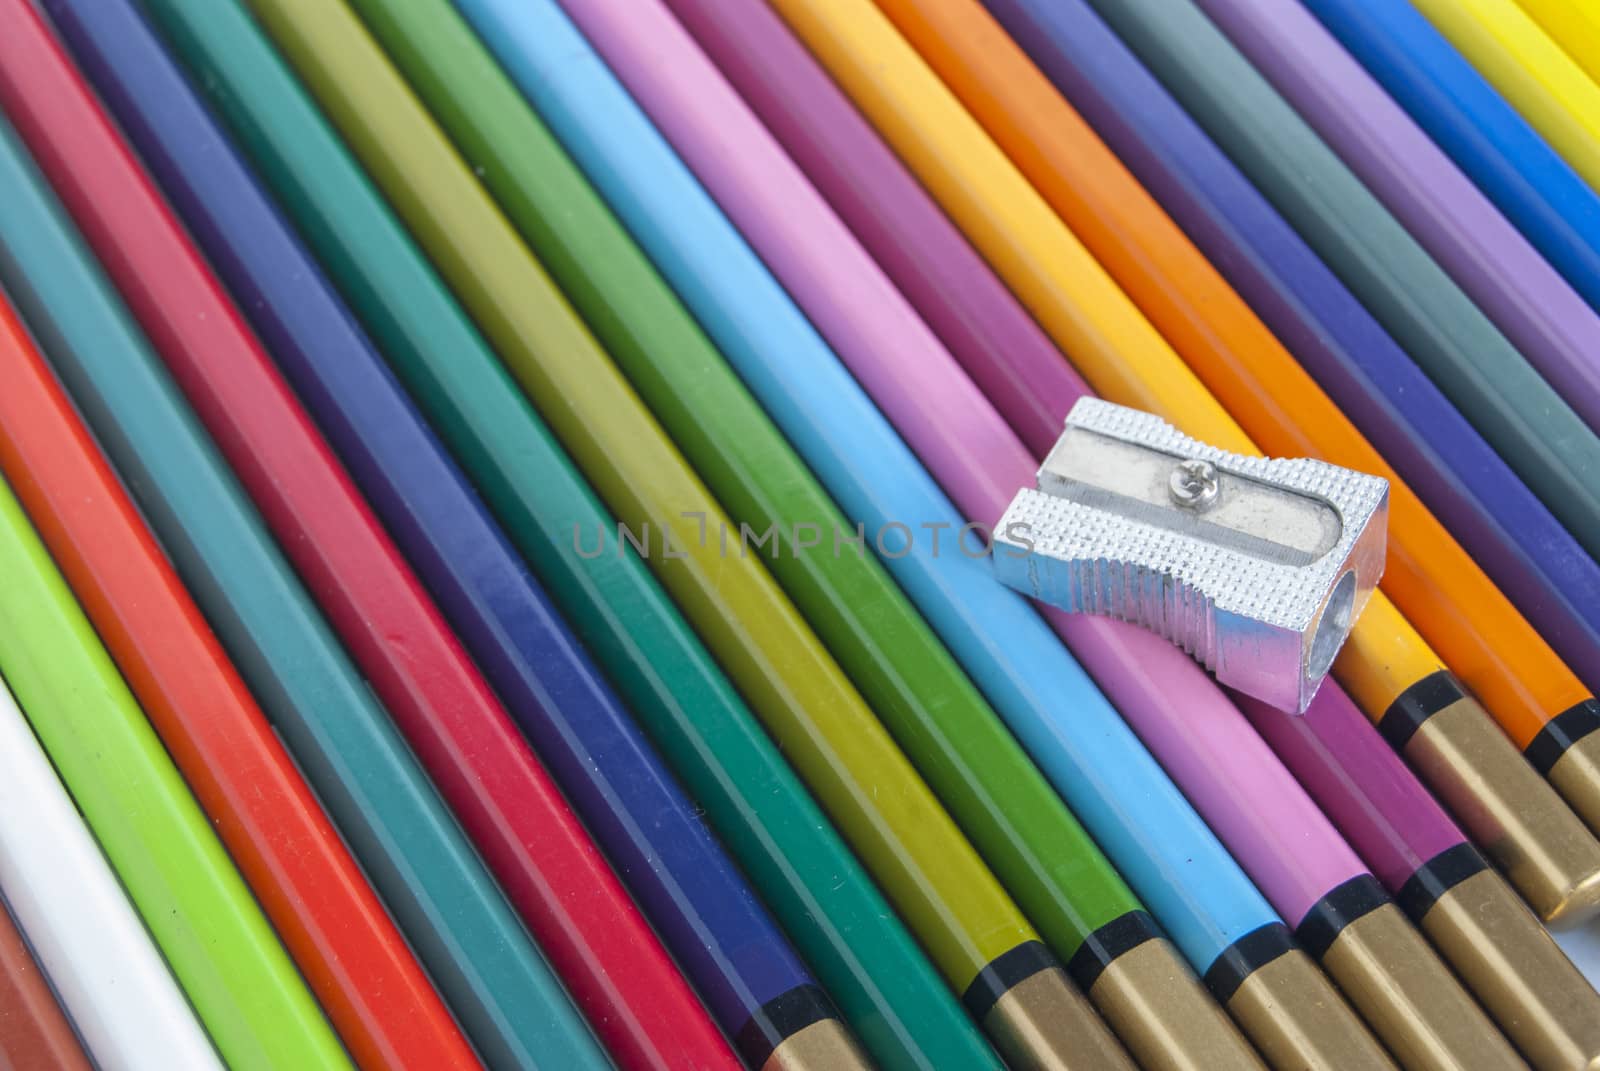 Used color pencils and sharpener by varbenov